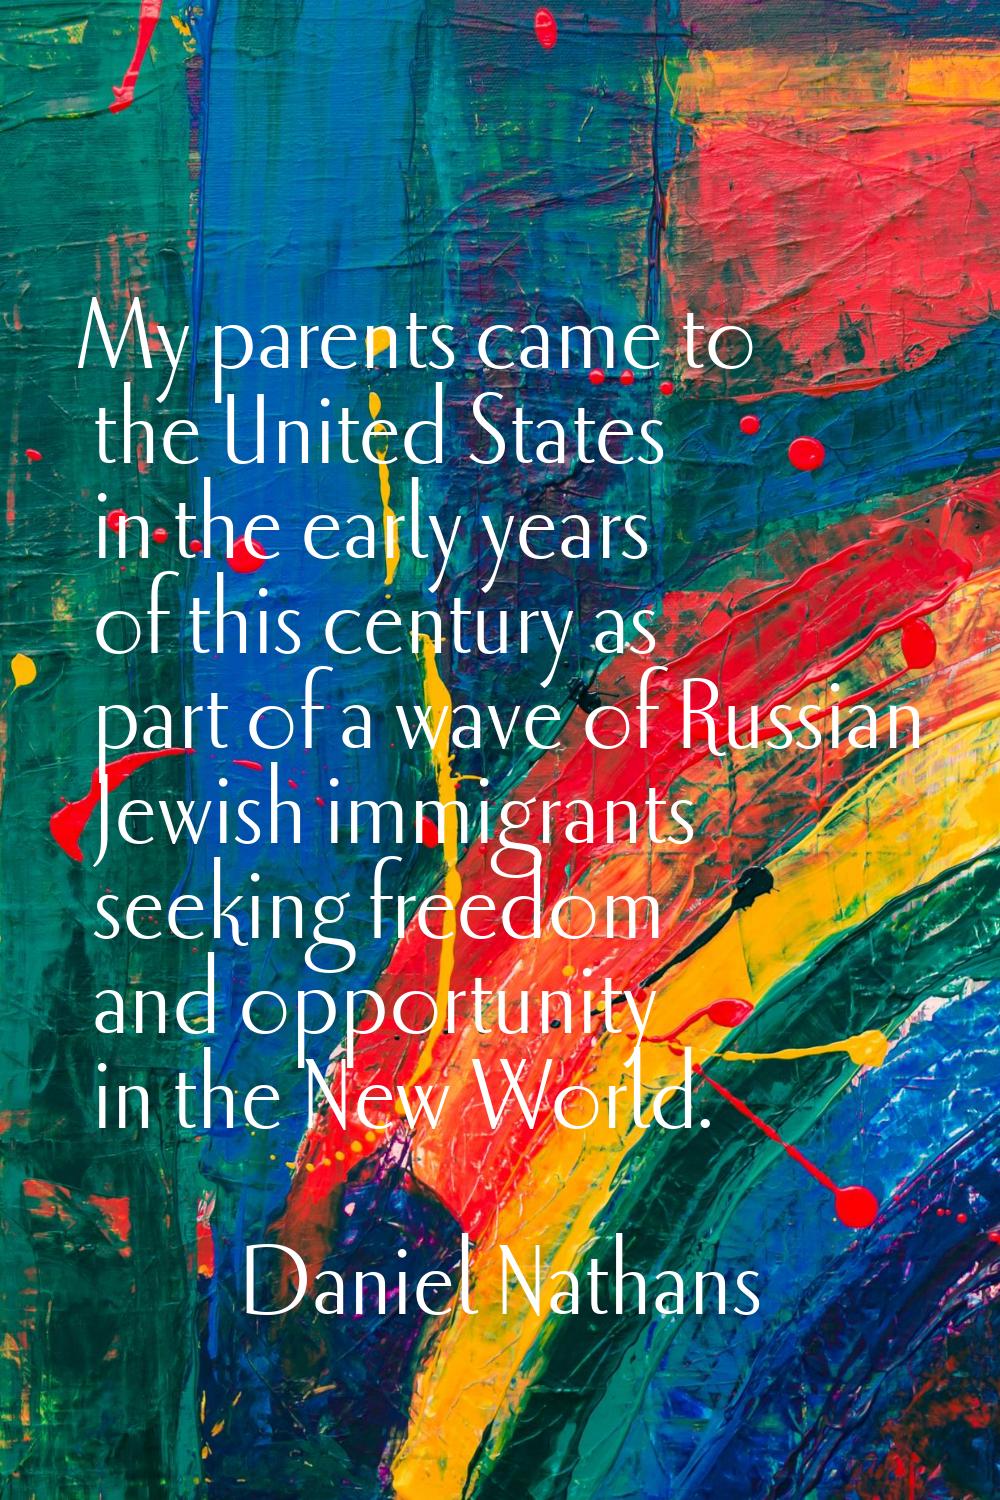 My parents came to the United States in the early years of this century as part of a wave of Russia